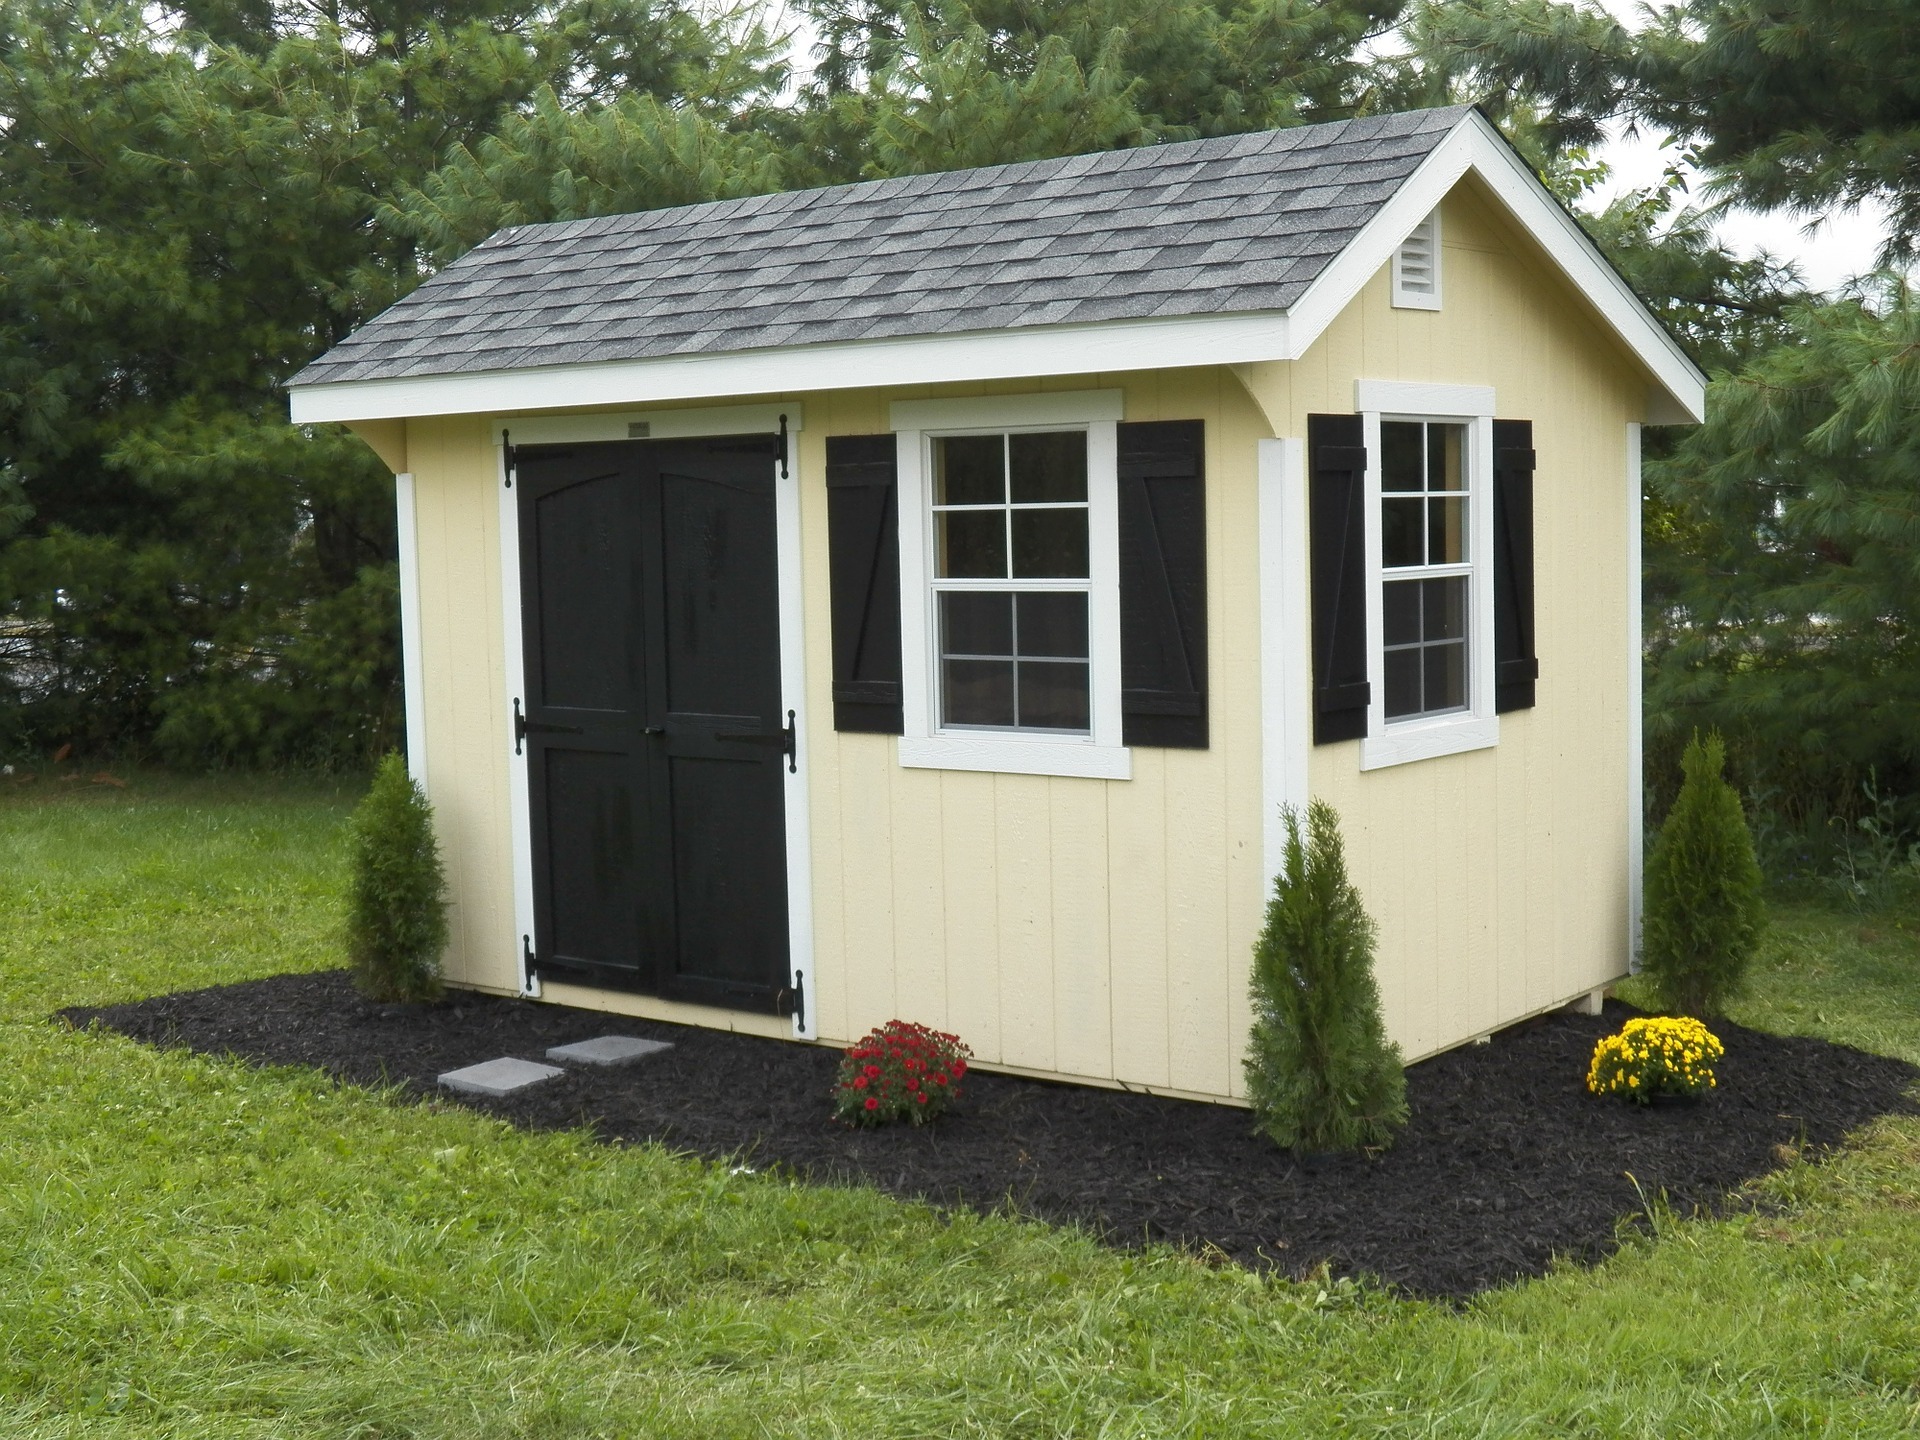 9 Reasons You Need a Storage Shed